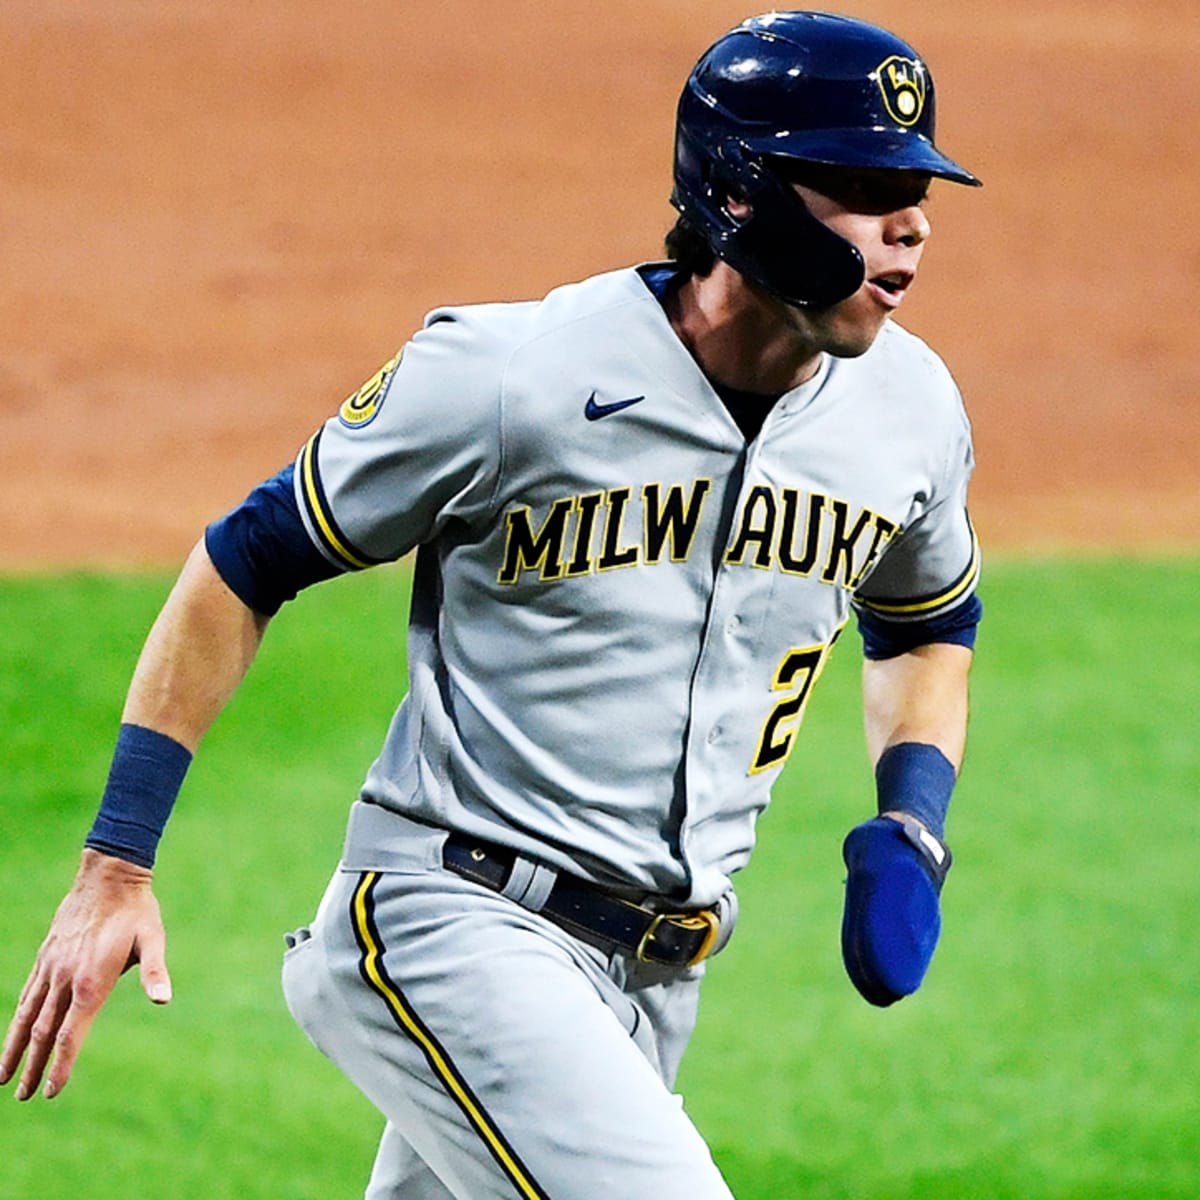 Quick scouting report on Milwaukee Brewers call-up Mauricio Dubon